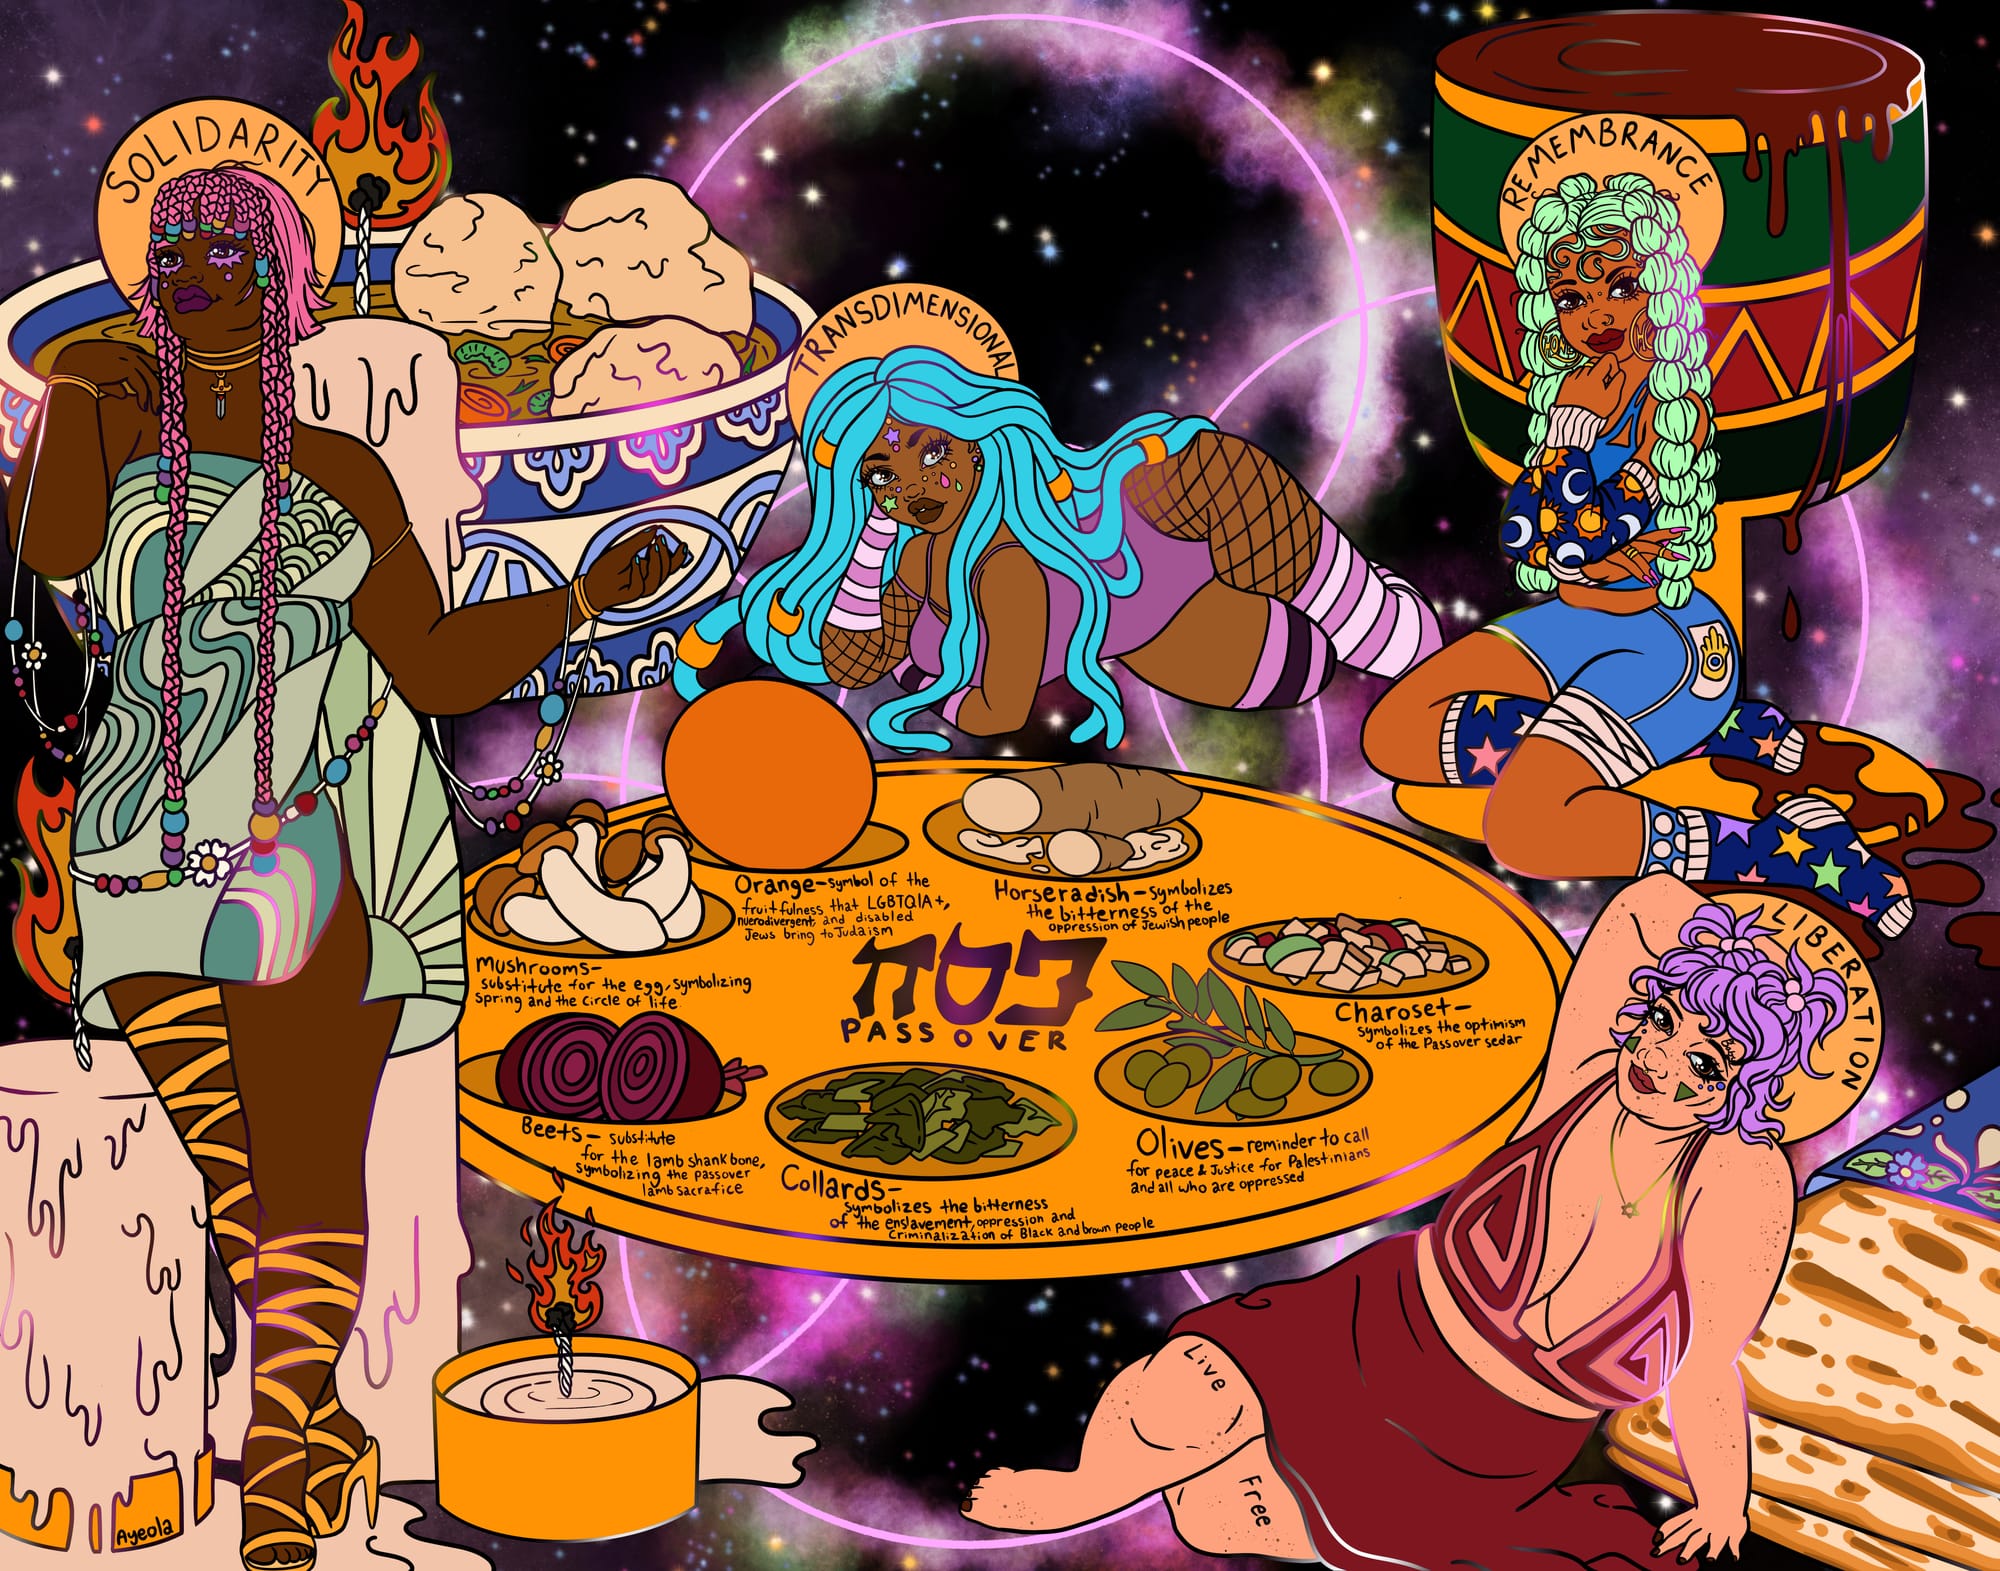 Four femme presenting people lying around a gigantic seder plate with a galactic background. 